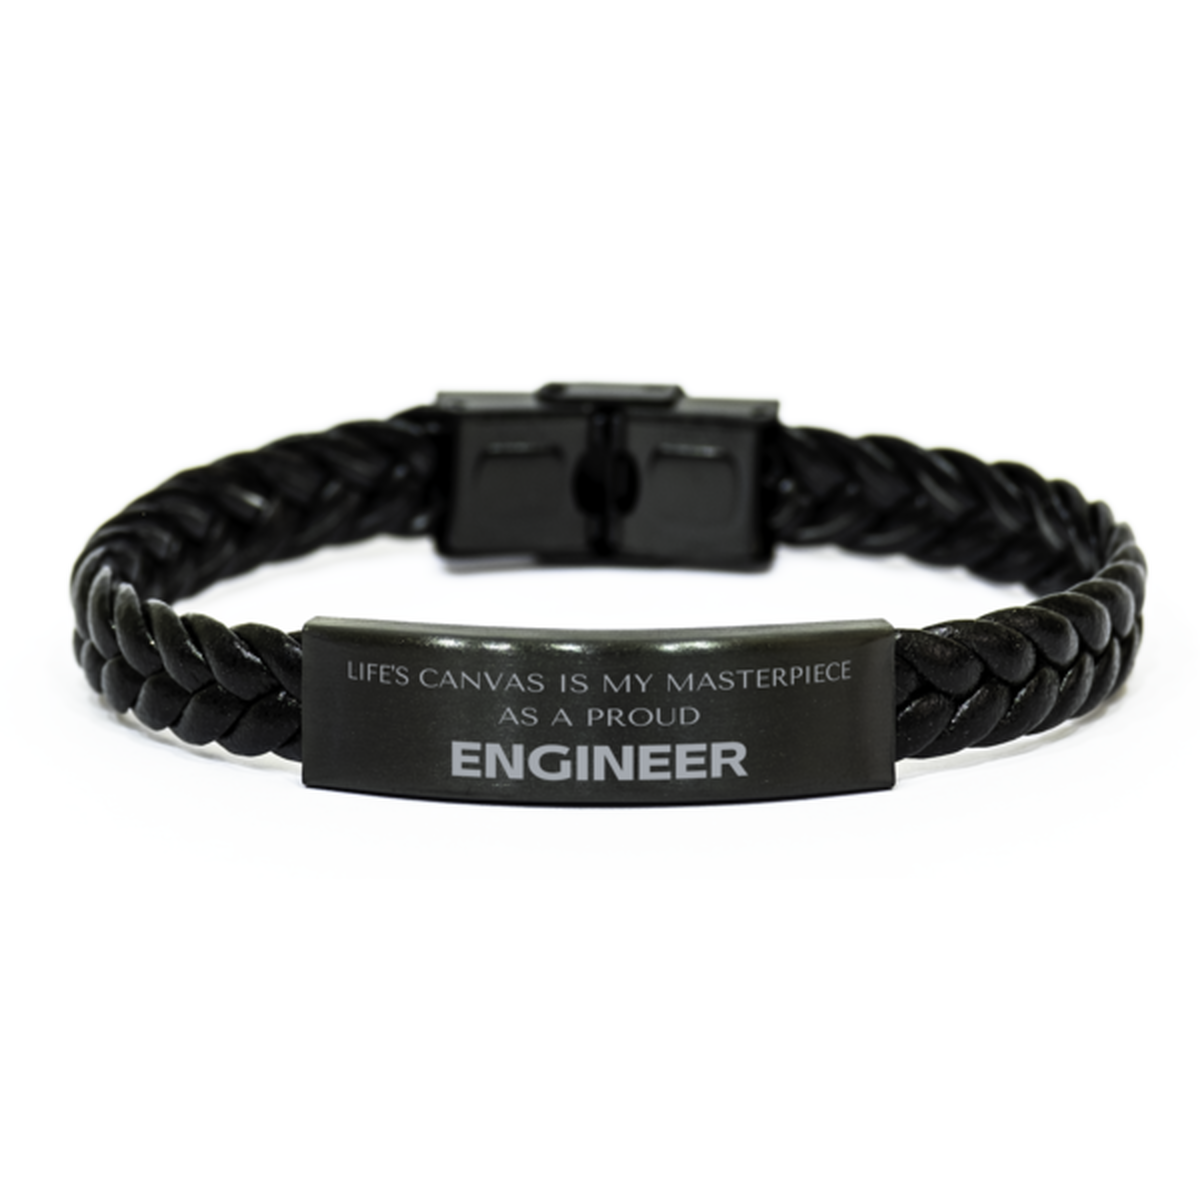 Proud Engineer Gifts, Life's canvas is my masterpiece, Epic Birthday Christmas Unique Braided Leather Bracelet For Engineer, Coworkers, Men, Women, Friends